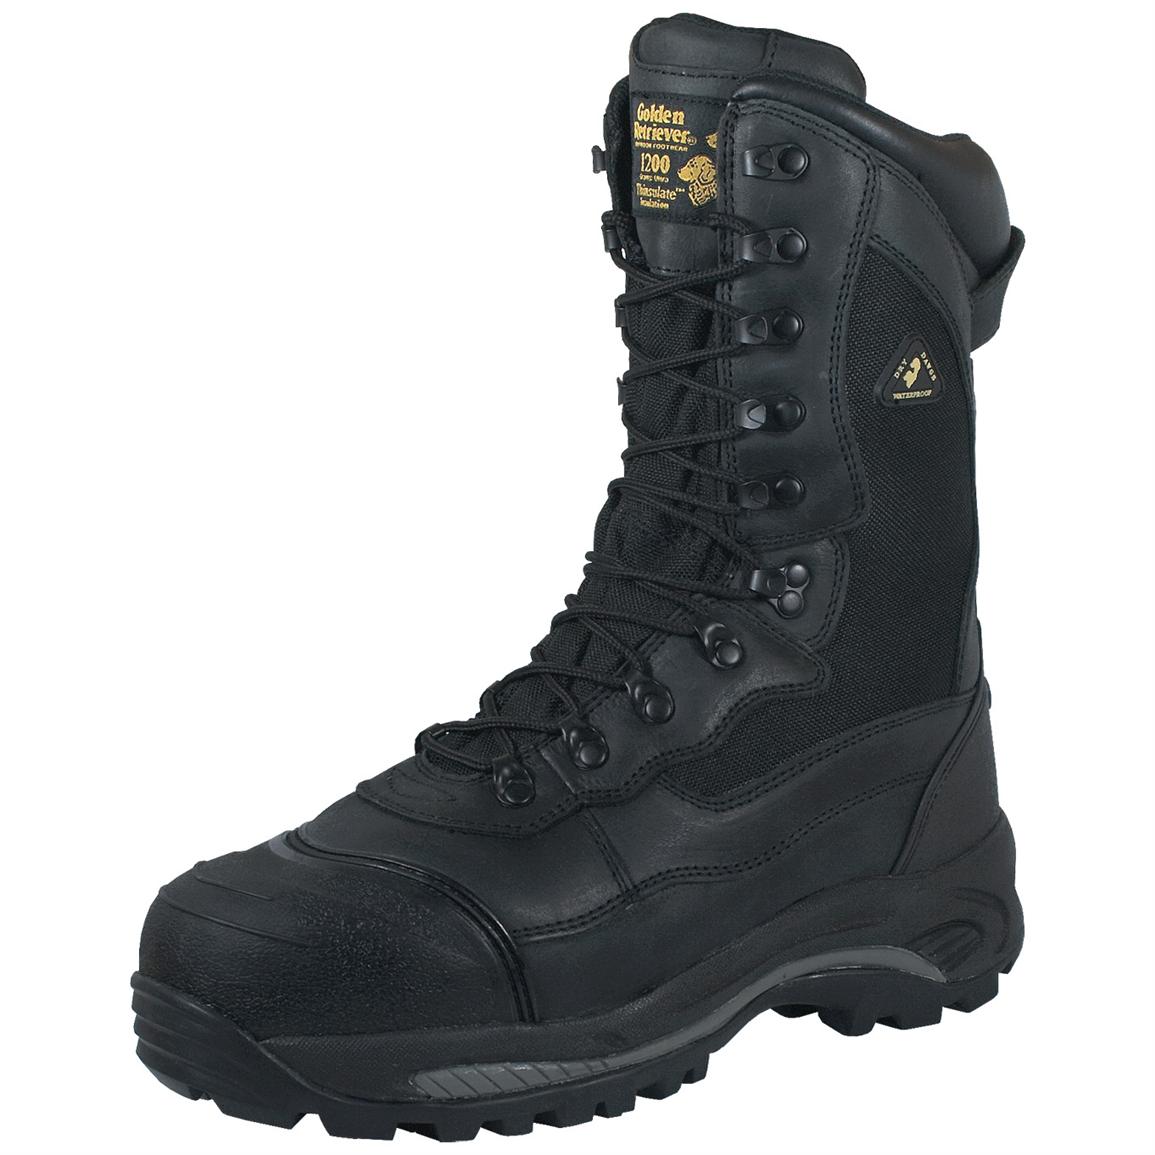 1200 gram insulated composite toe work boots